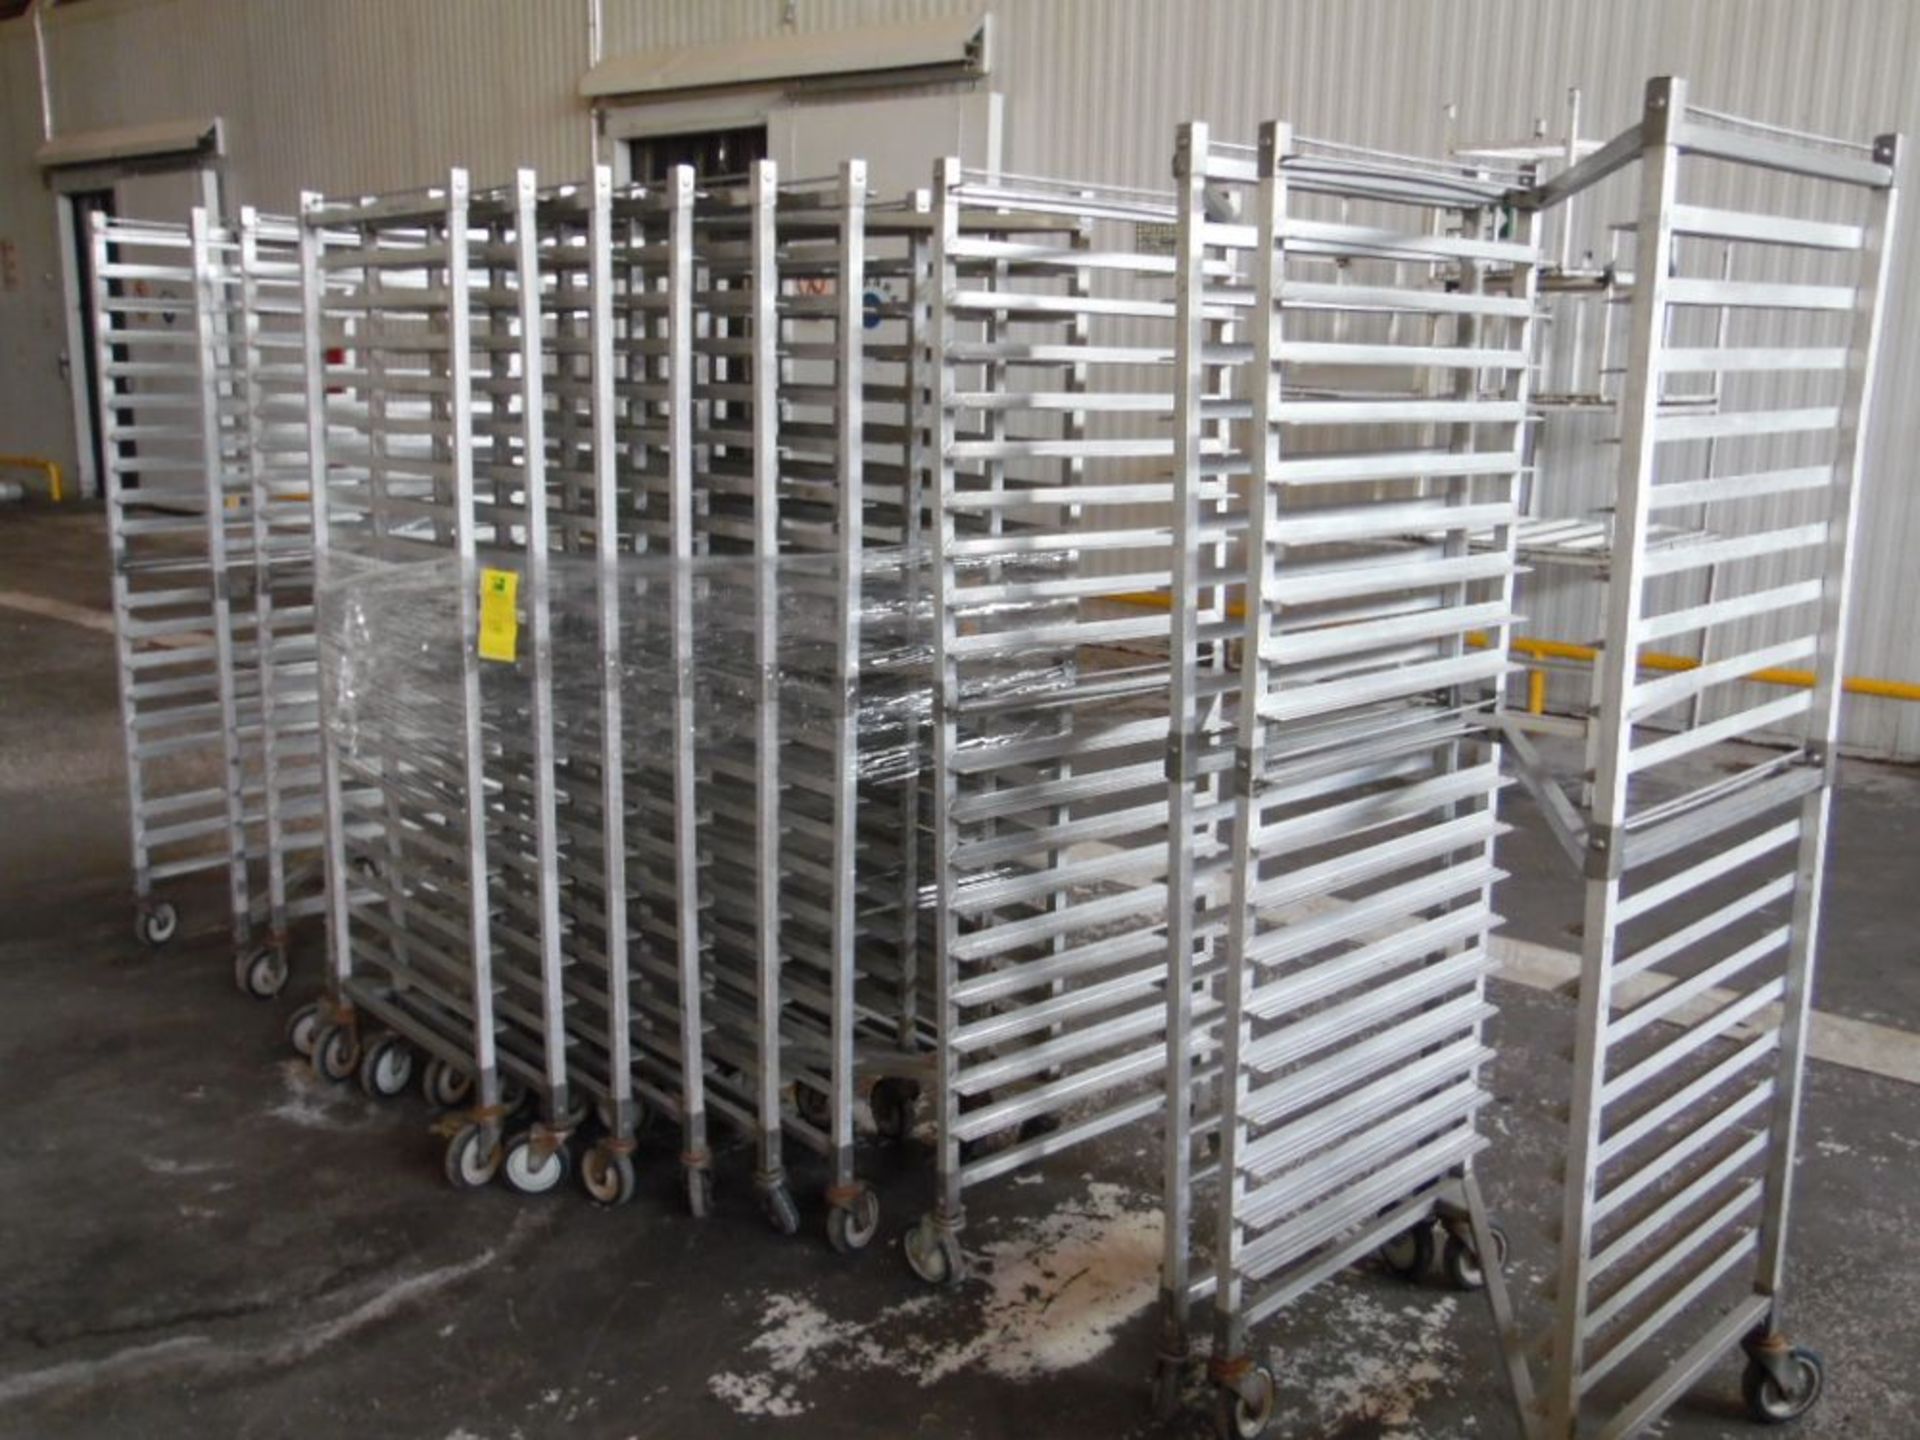 LOT OF 10 CARTS EXPERIENCE OF 20 TRAYS EACH WITH 45 CM WIDTHS FOR 65 LONG.(rigging fee $15.00